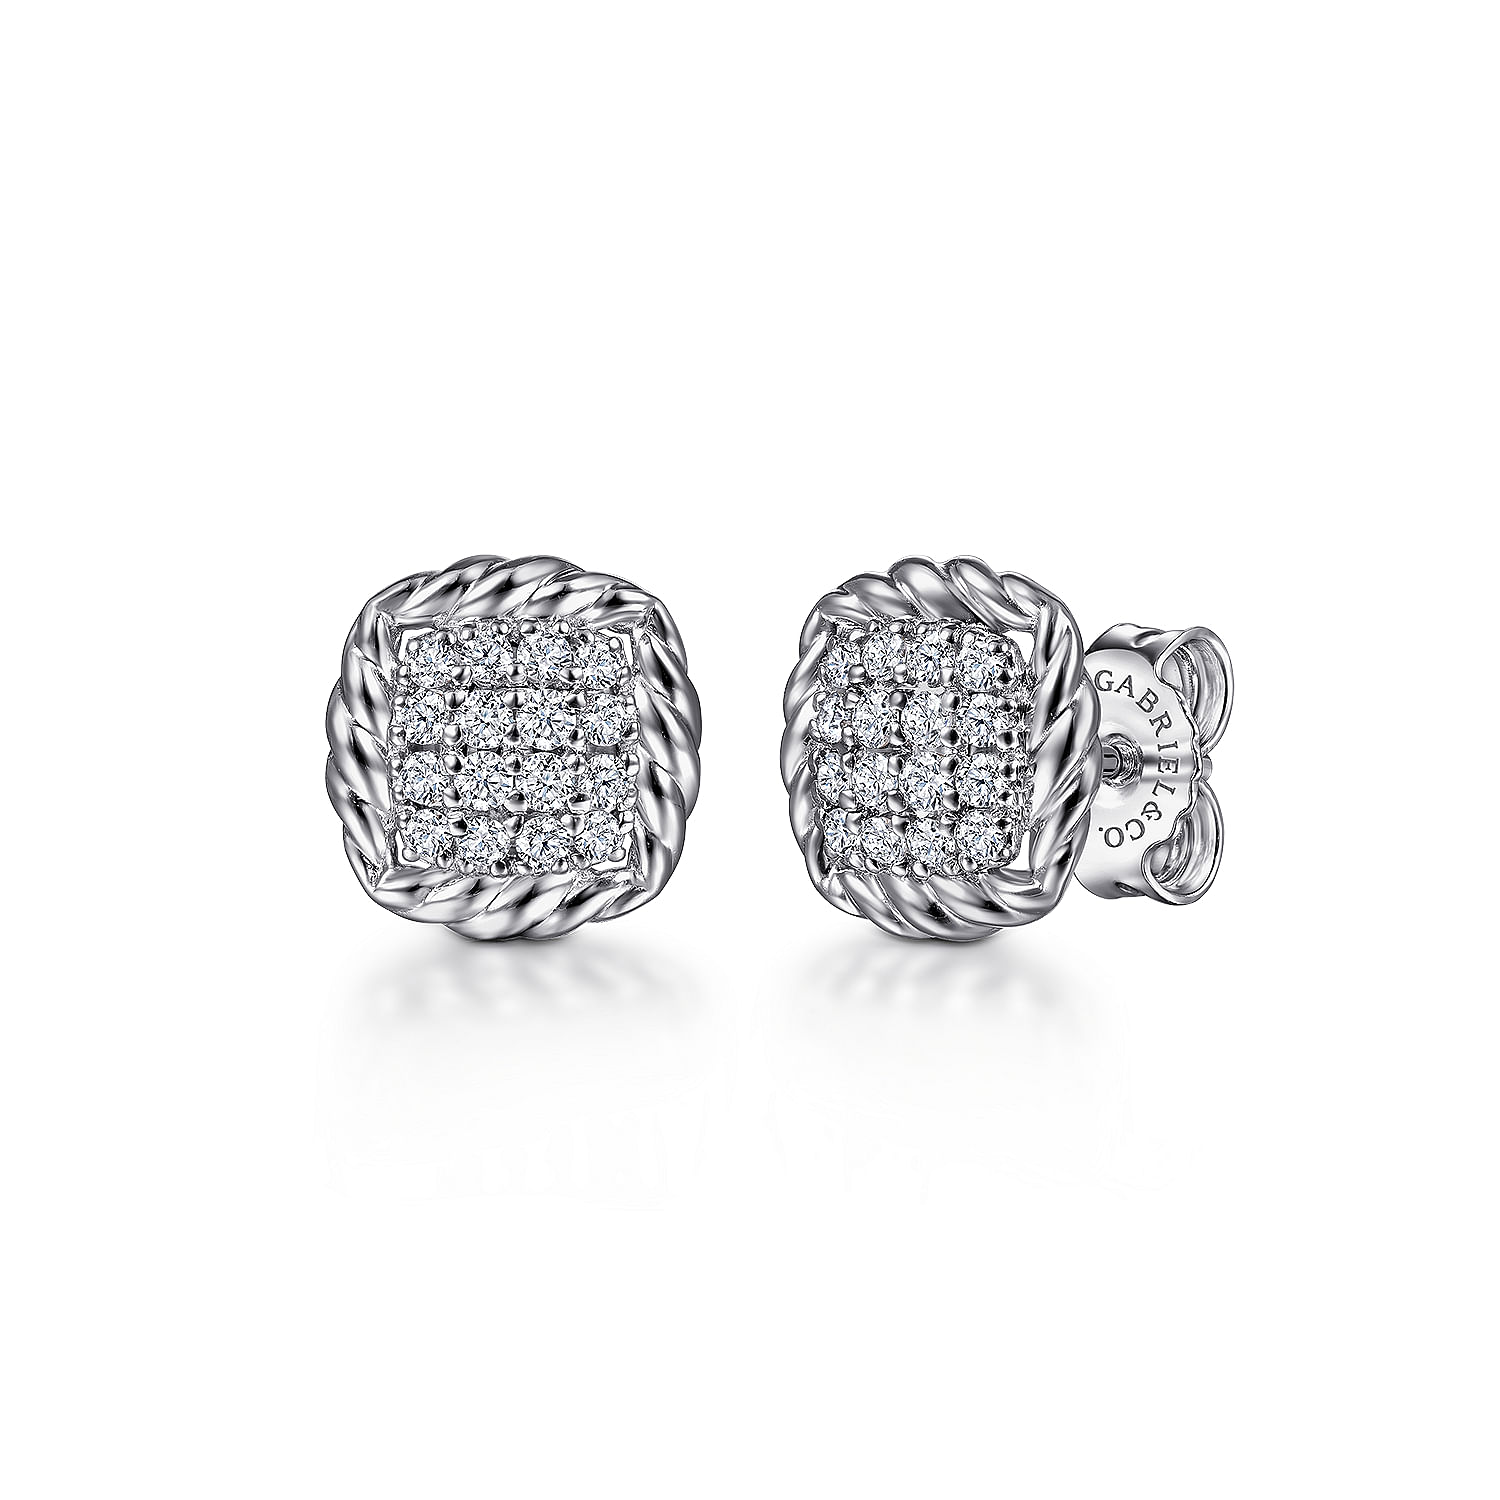 925-Sterling-Silver-White-Sapphire-and-Rope-Frame-Stud-Earrings1